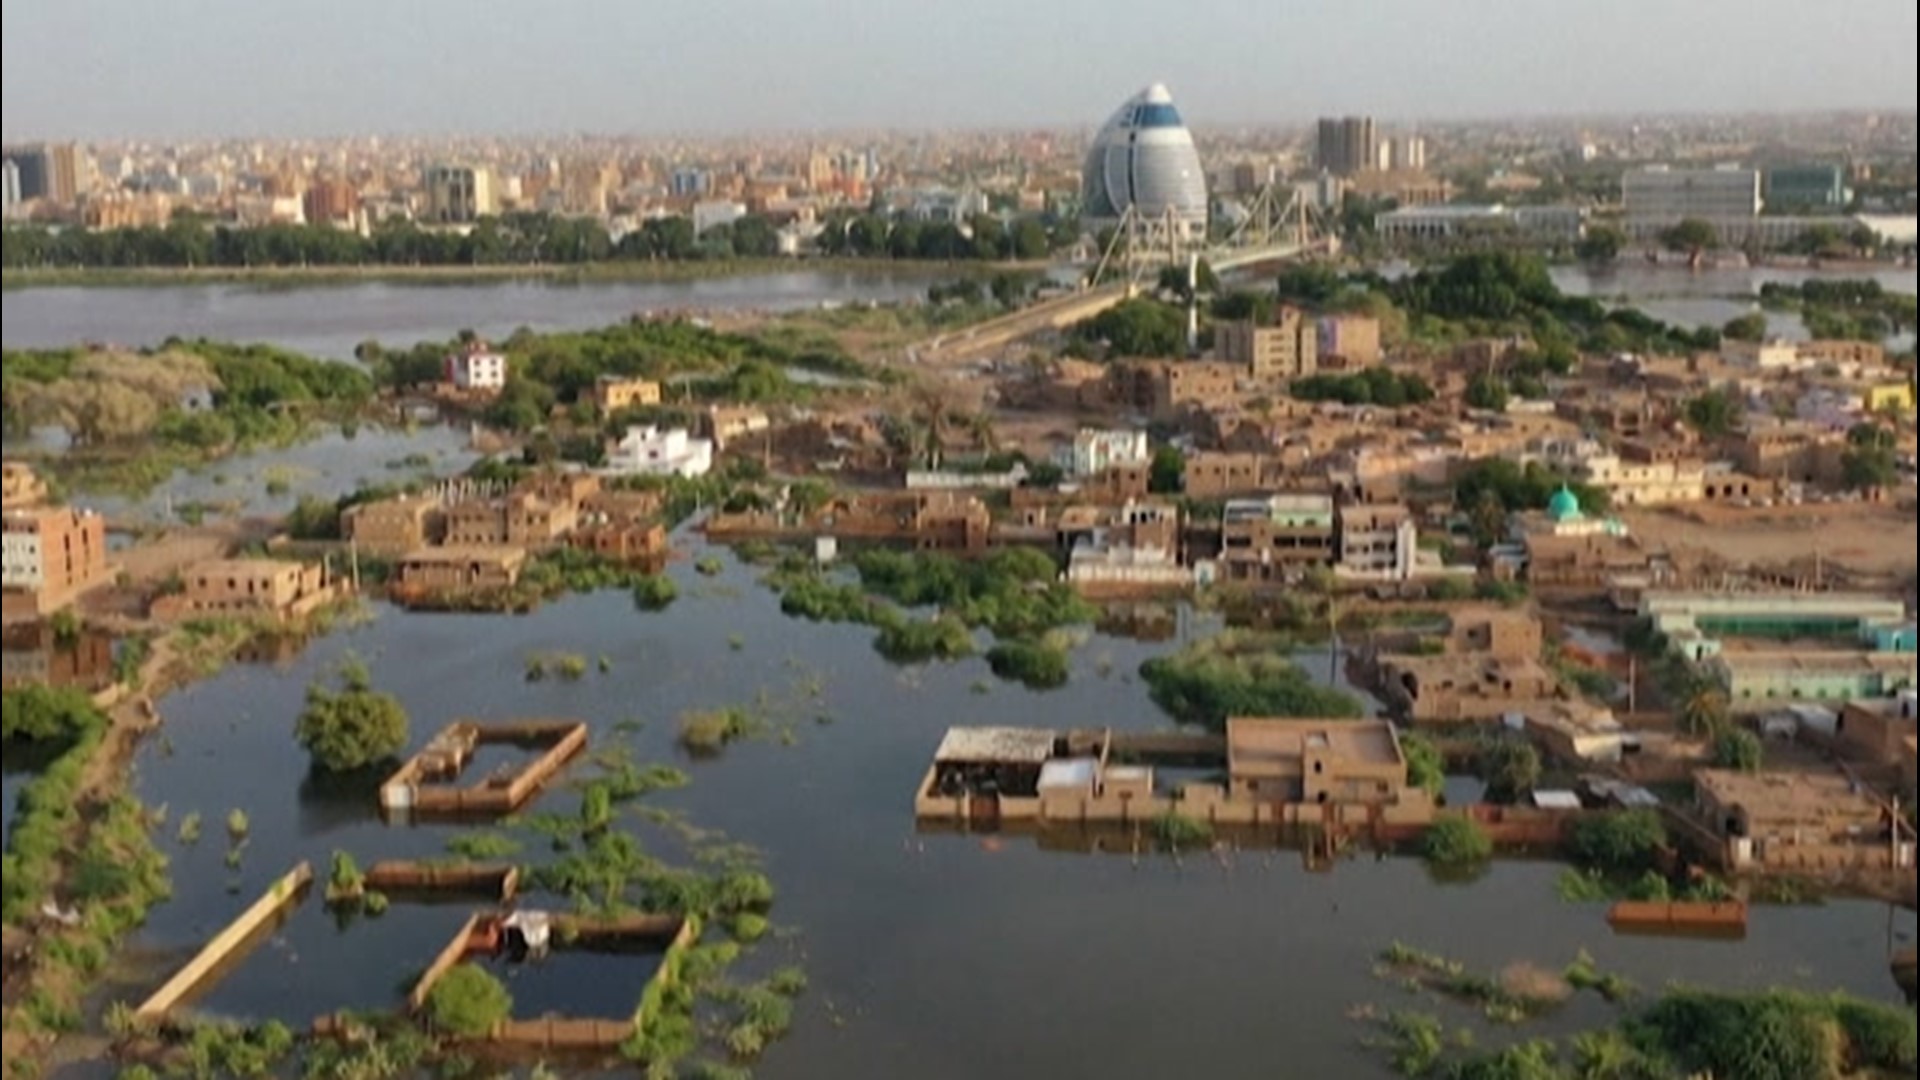 Khartoum, Sudan, was drenched by the Nile River on Aug. 11. It was the highest flooding since records began as residents struggled to hold the water back.